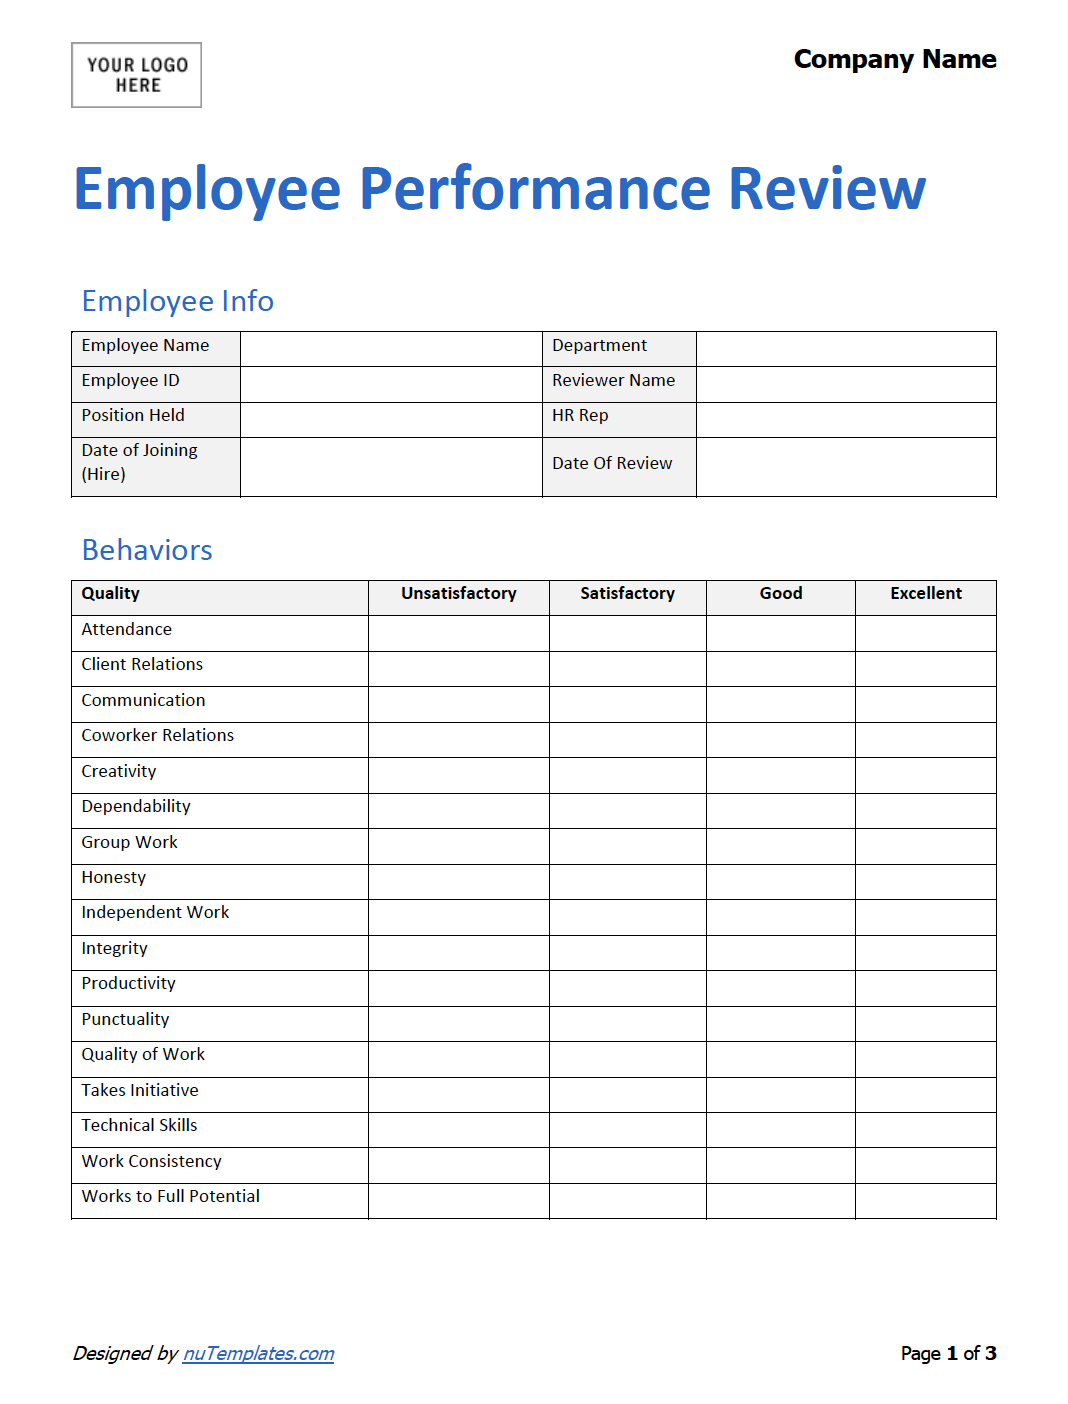 employee-performance-review-template-nutemplates